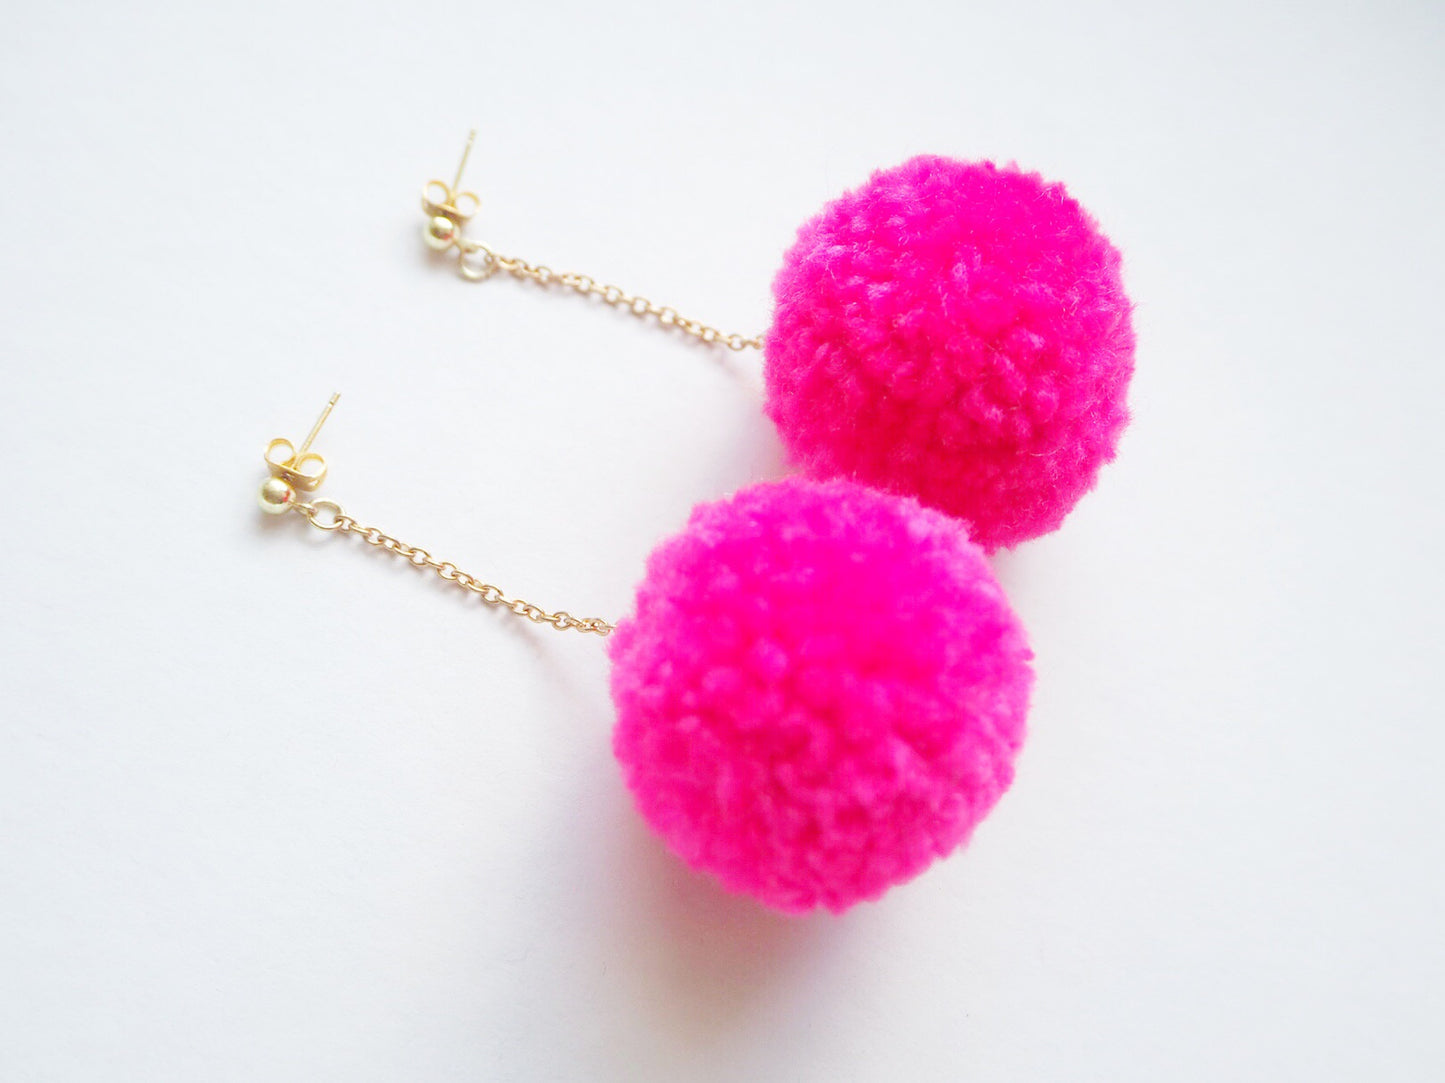 Hot_Pink_Pom_Pom_Gold_Chain_Earrings - Nariss by Narissara